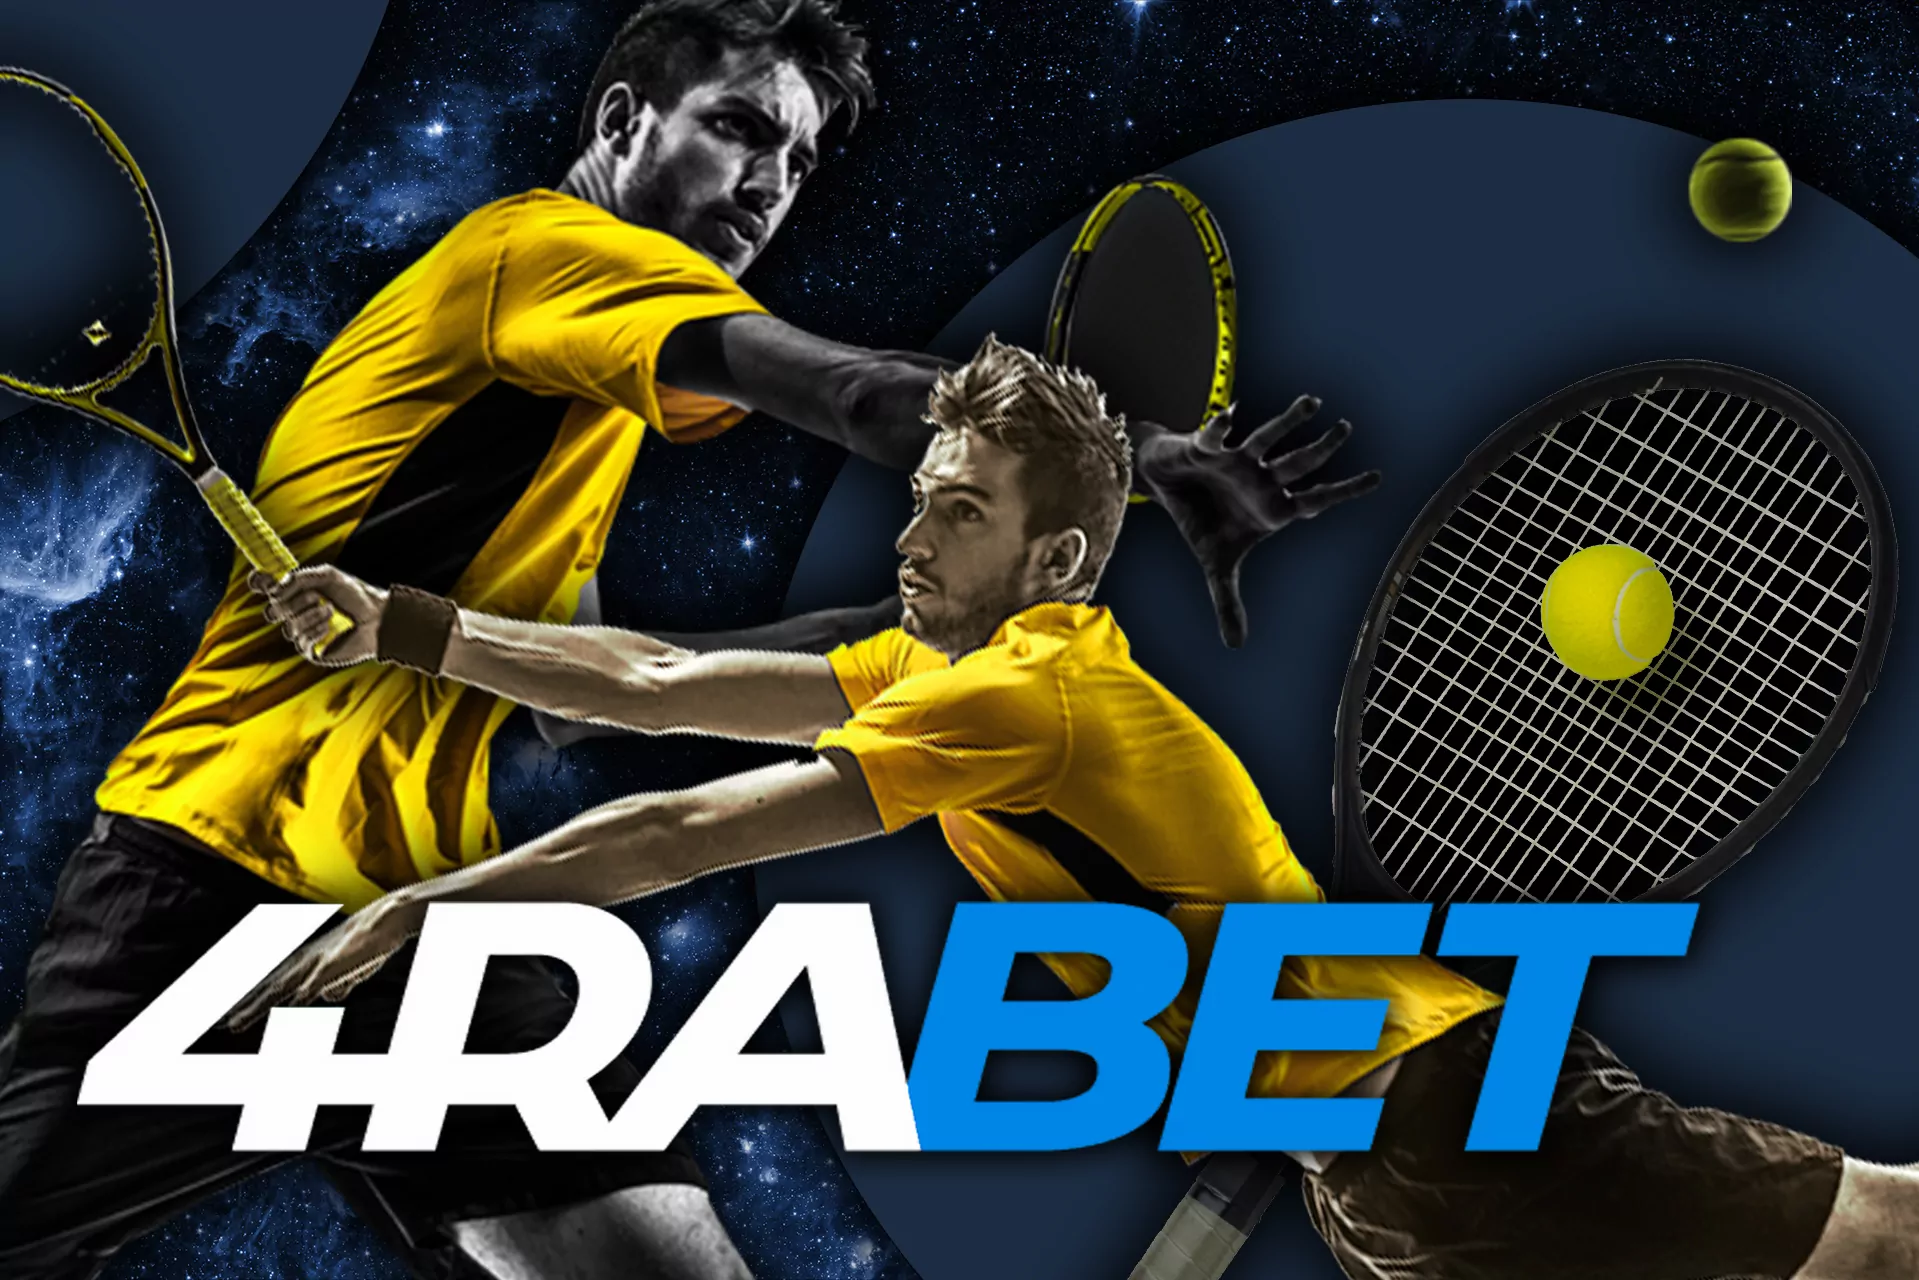 Bet on WTA league in the 4rabet sportsbook.